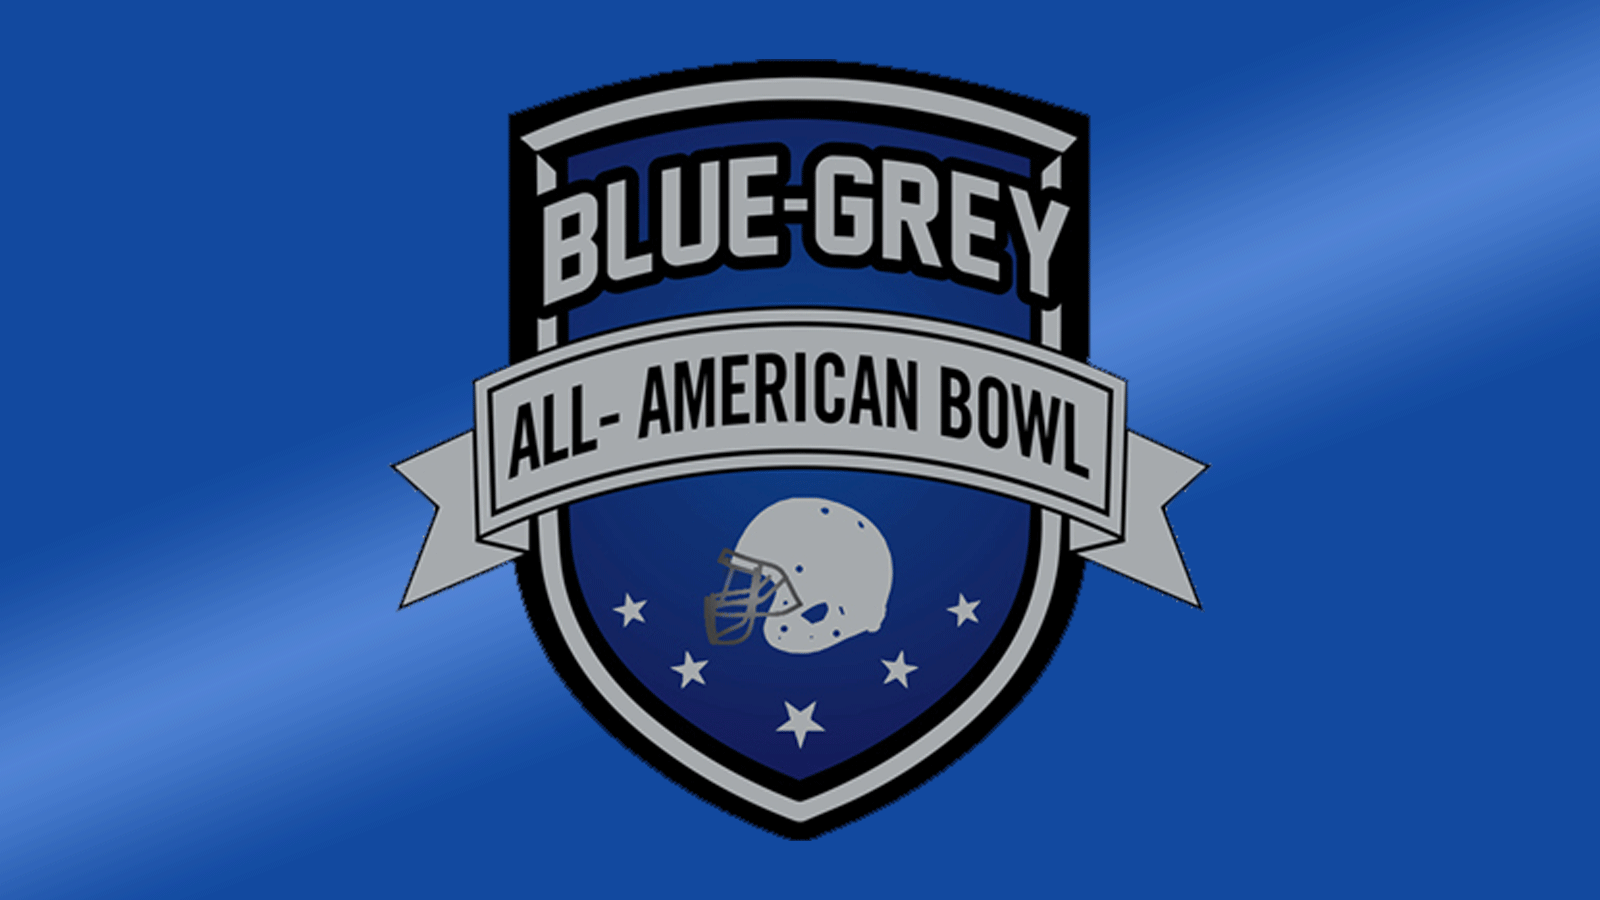 North Stanly football player to participate in BlueGrey AllAmerican